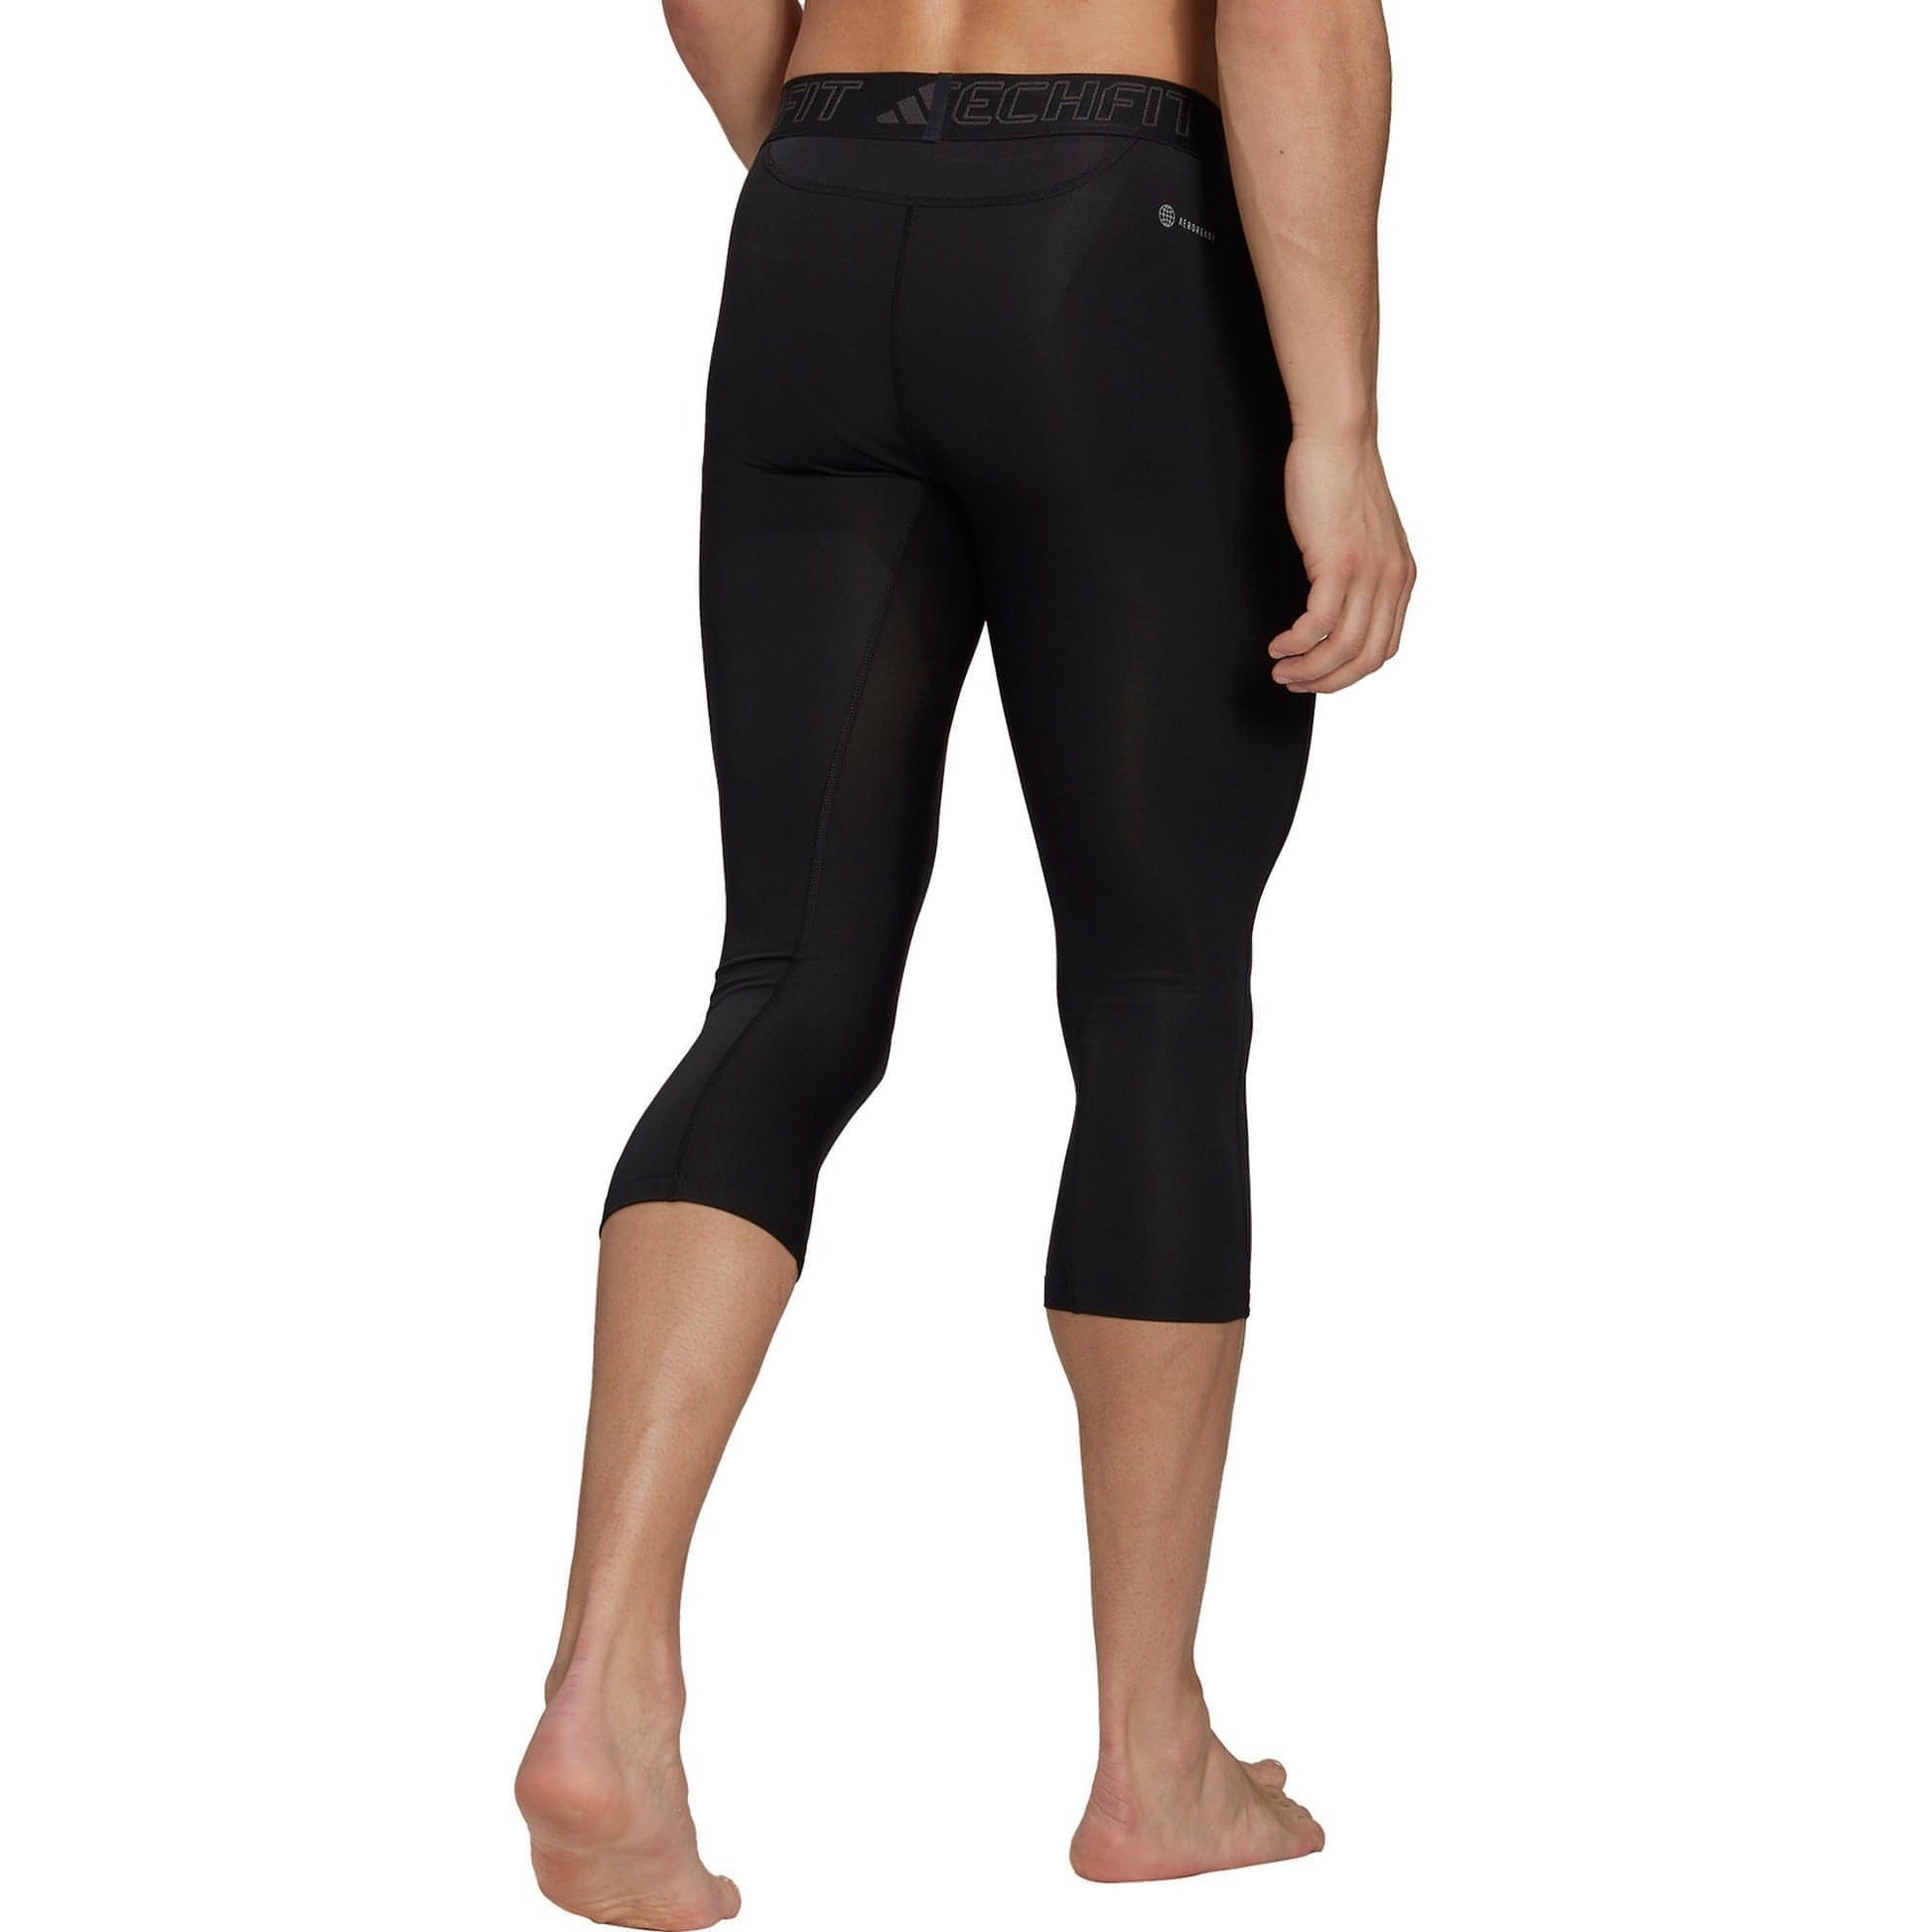 Adidas Tech Fit Tights Hd3523 Back View